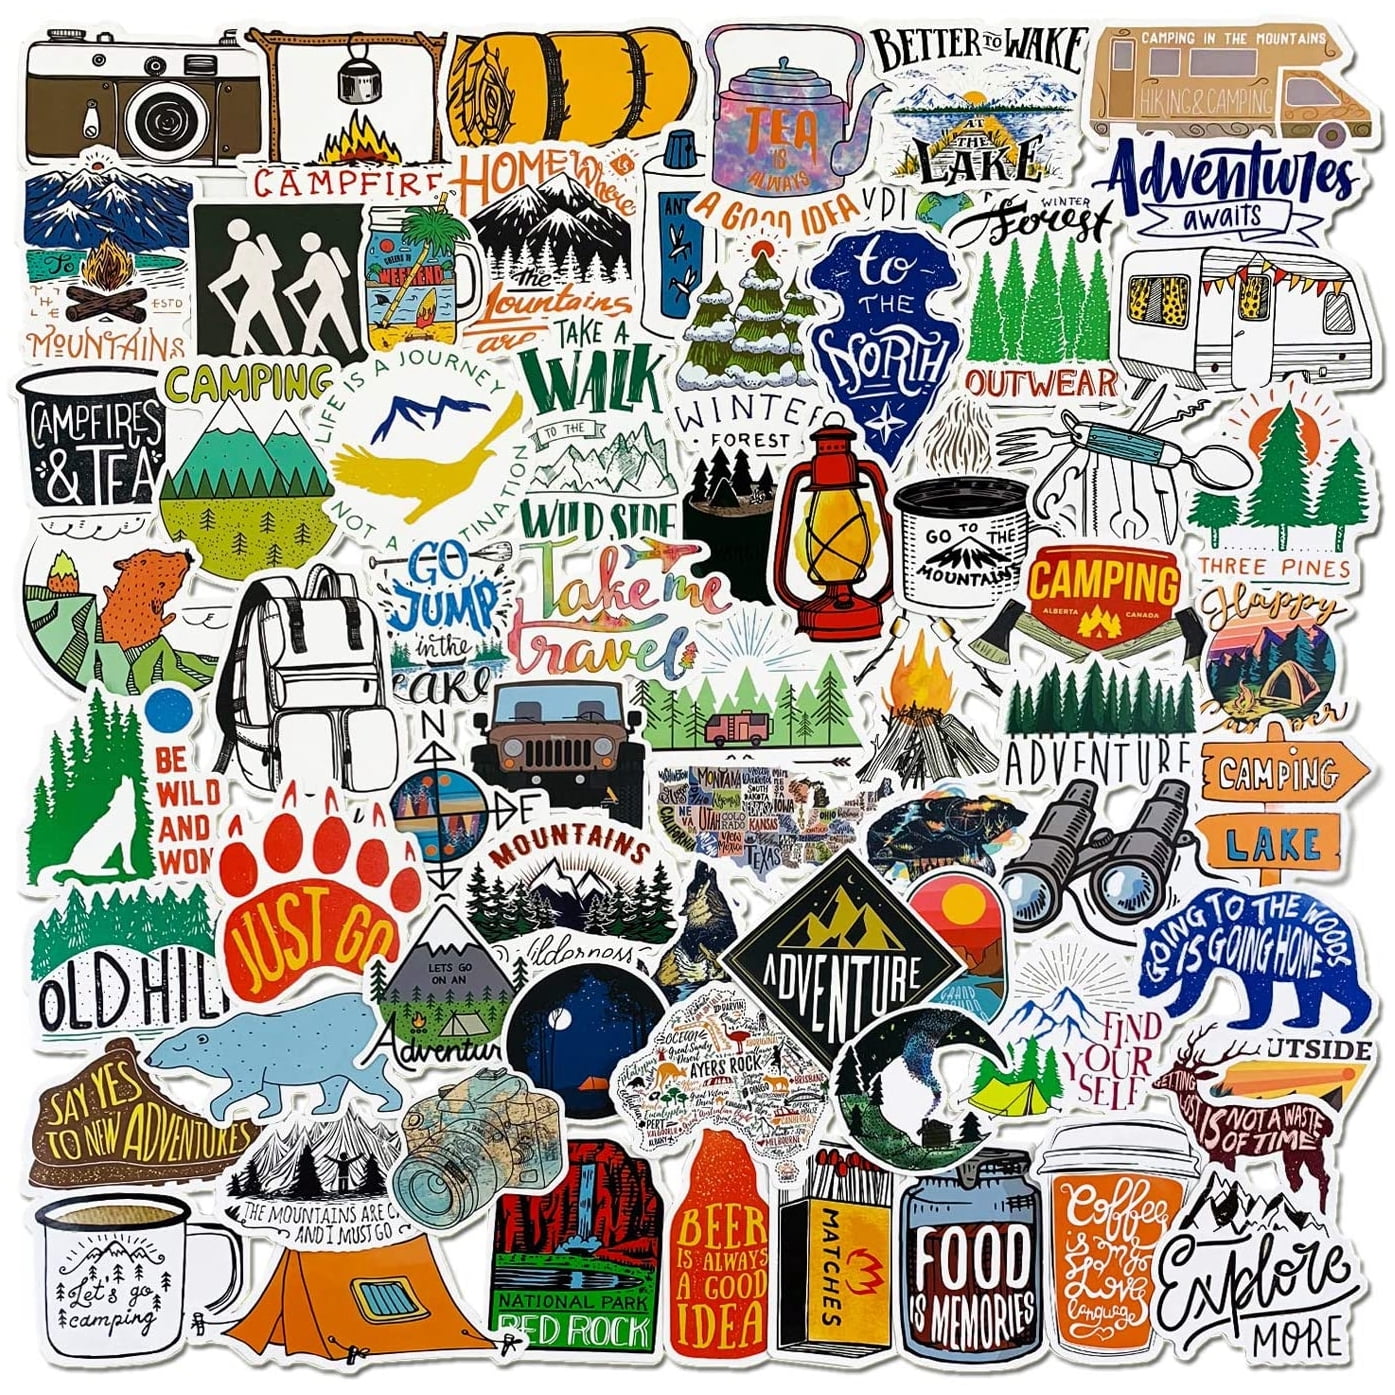 Wilderness Nature Outdoors Hiking Camping Travel Adventure Gift Stickers Waterproof RV Trailer Car Luggage Decal Wind Cave National Park Sticker Vinyl Shield